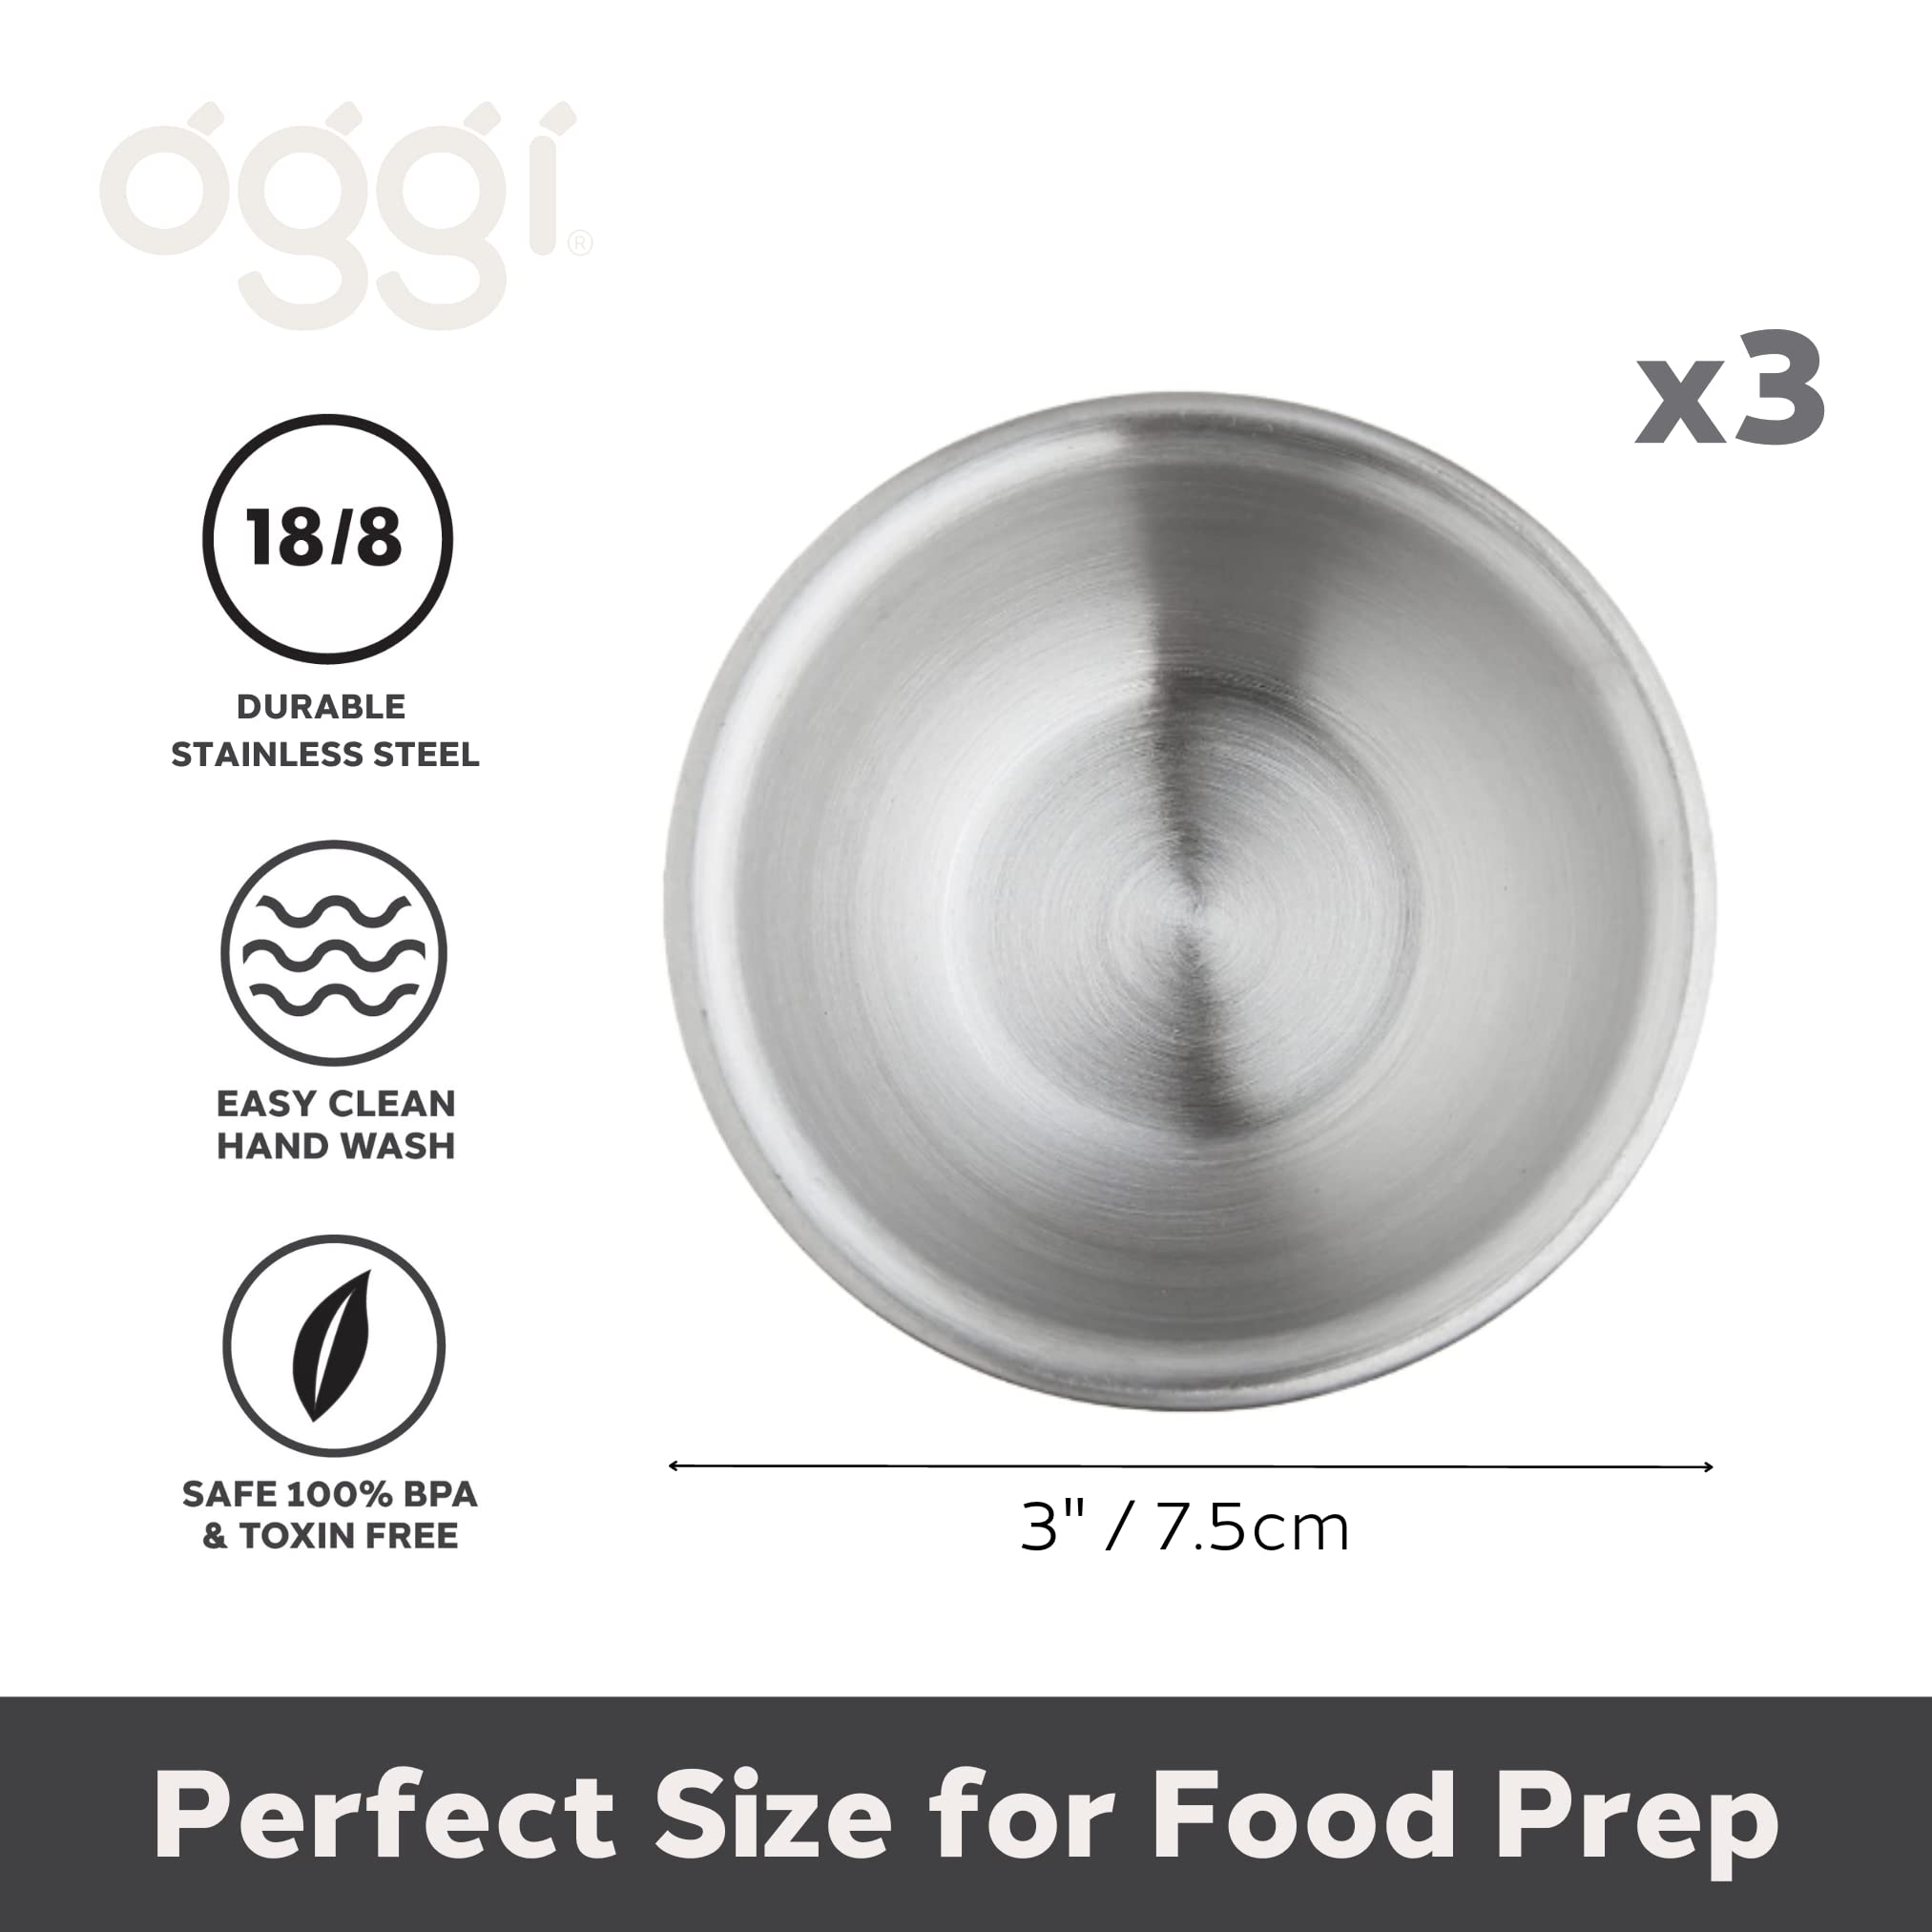 Oggi Set of 3 x Stainless Pinch Bowls - 3oz with Lids, Ideal Salt and Pepper Bowls, Storage Bowls with Lids, Condiment Bowls, Mini Bowls, Prep Bowls for Cooking, Mise en Place Bowls - Stainless Steel